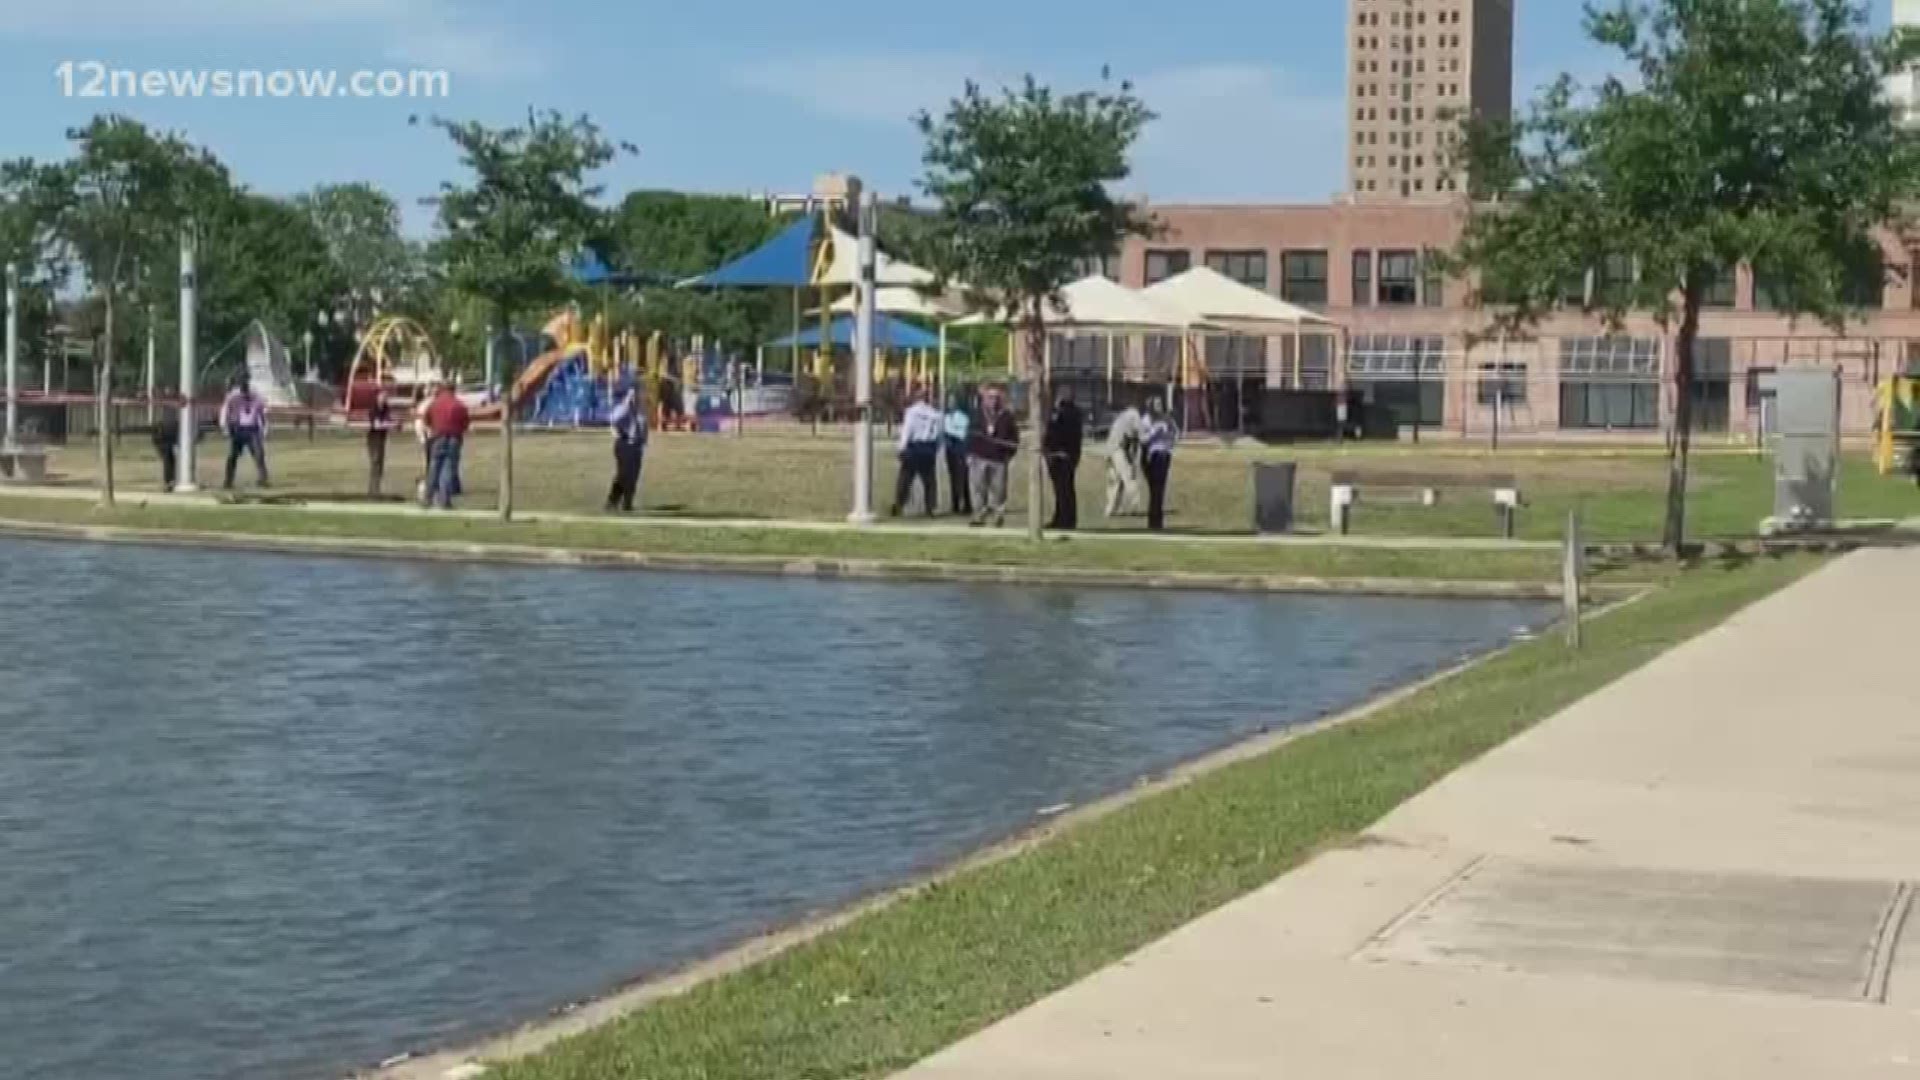 A 911 caller said it appeared a child was in the water, and an adult was trying to get him out